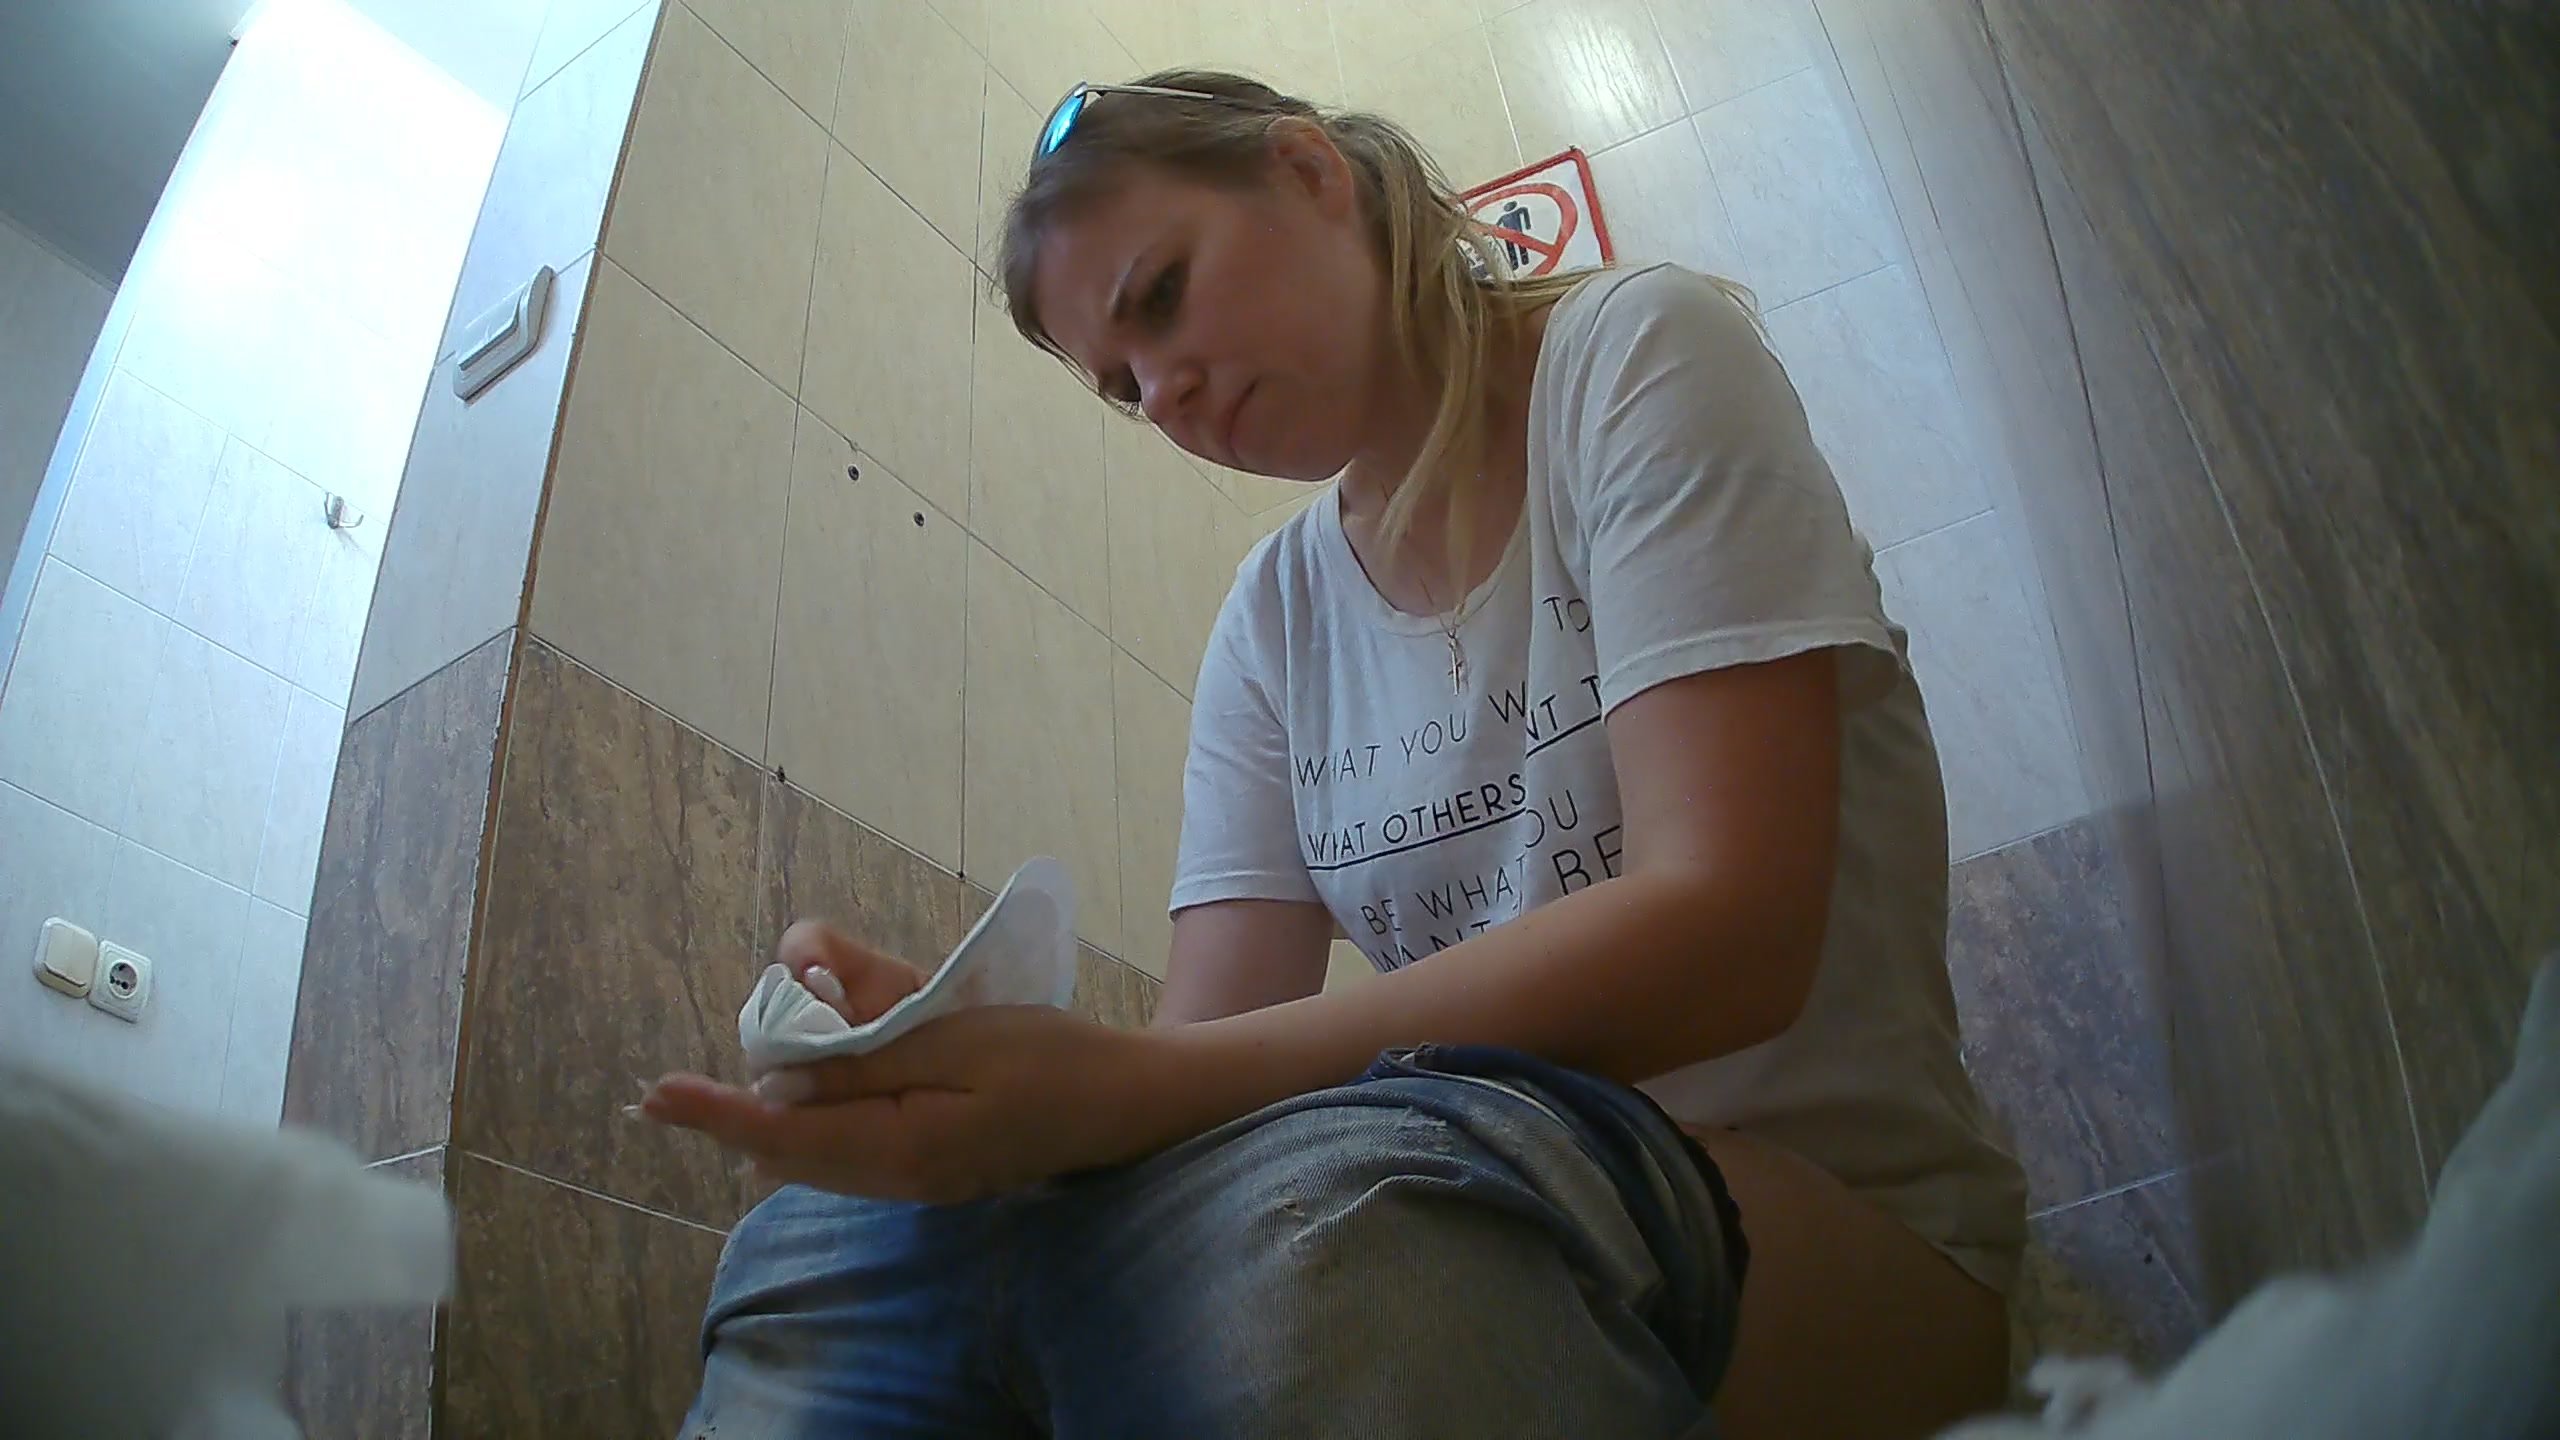 Sexy girl peeing in toilet - ThisVid.com.